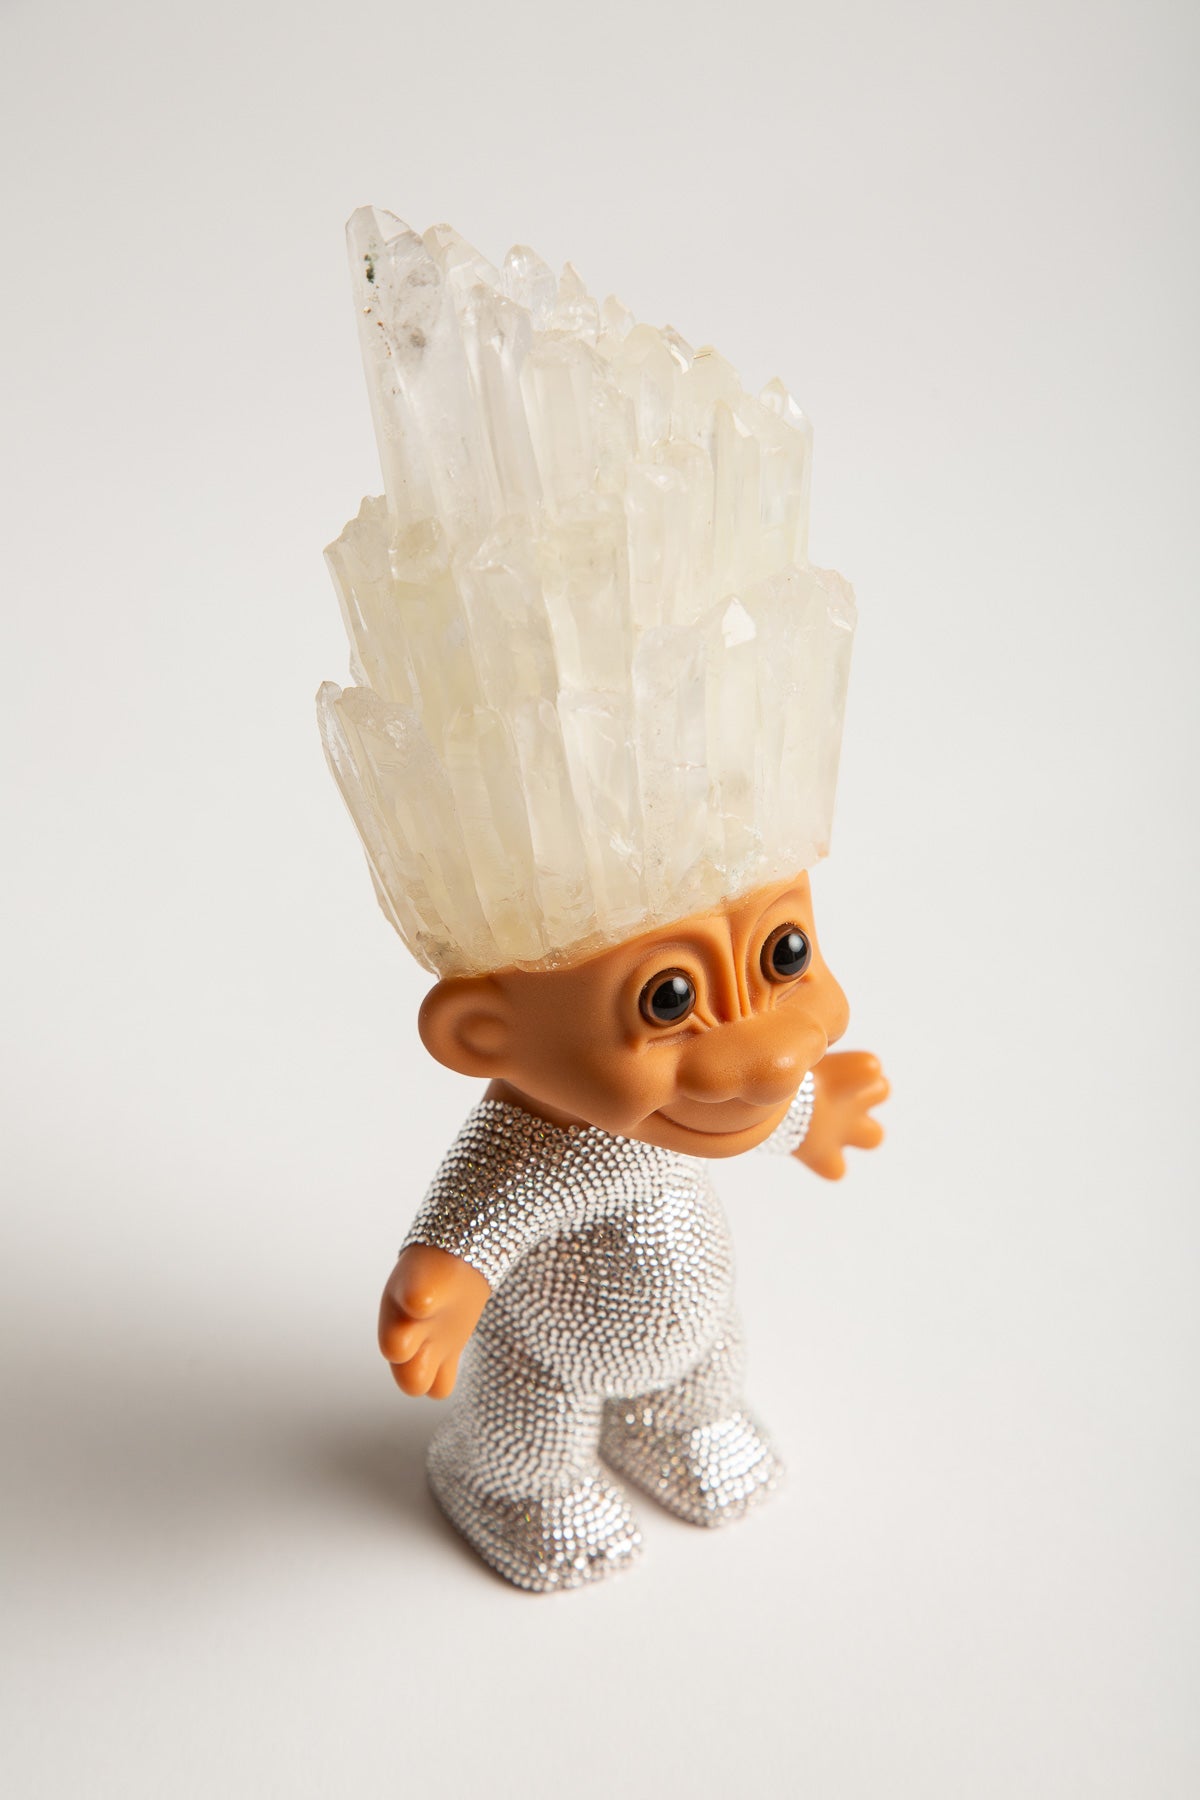 MAXFIELD PRIVATE COLLECTION | SMALL CRYSTAL TROLL